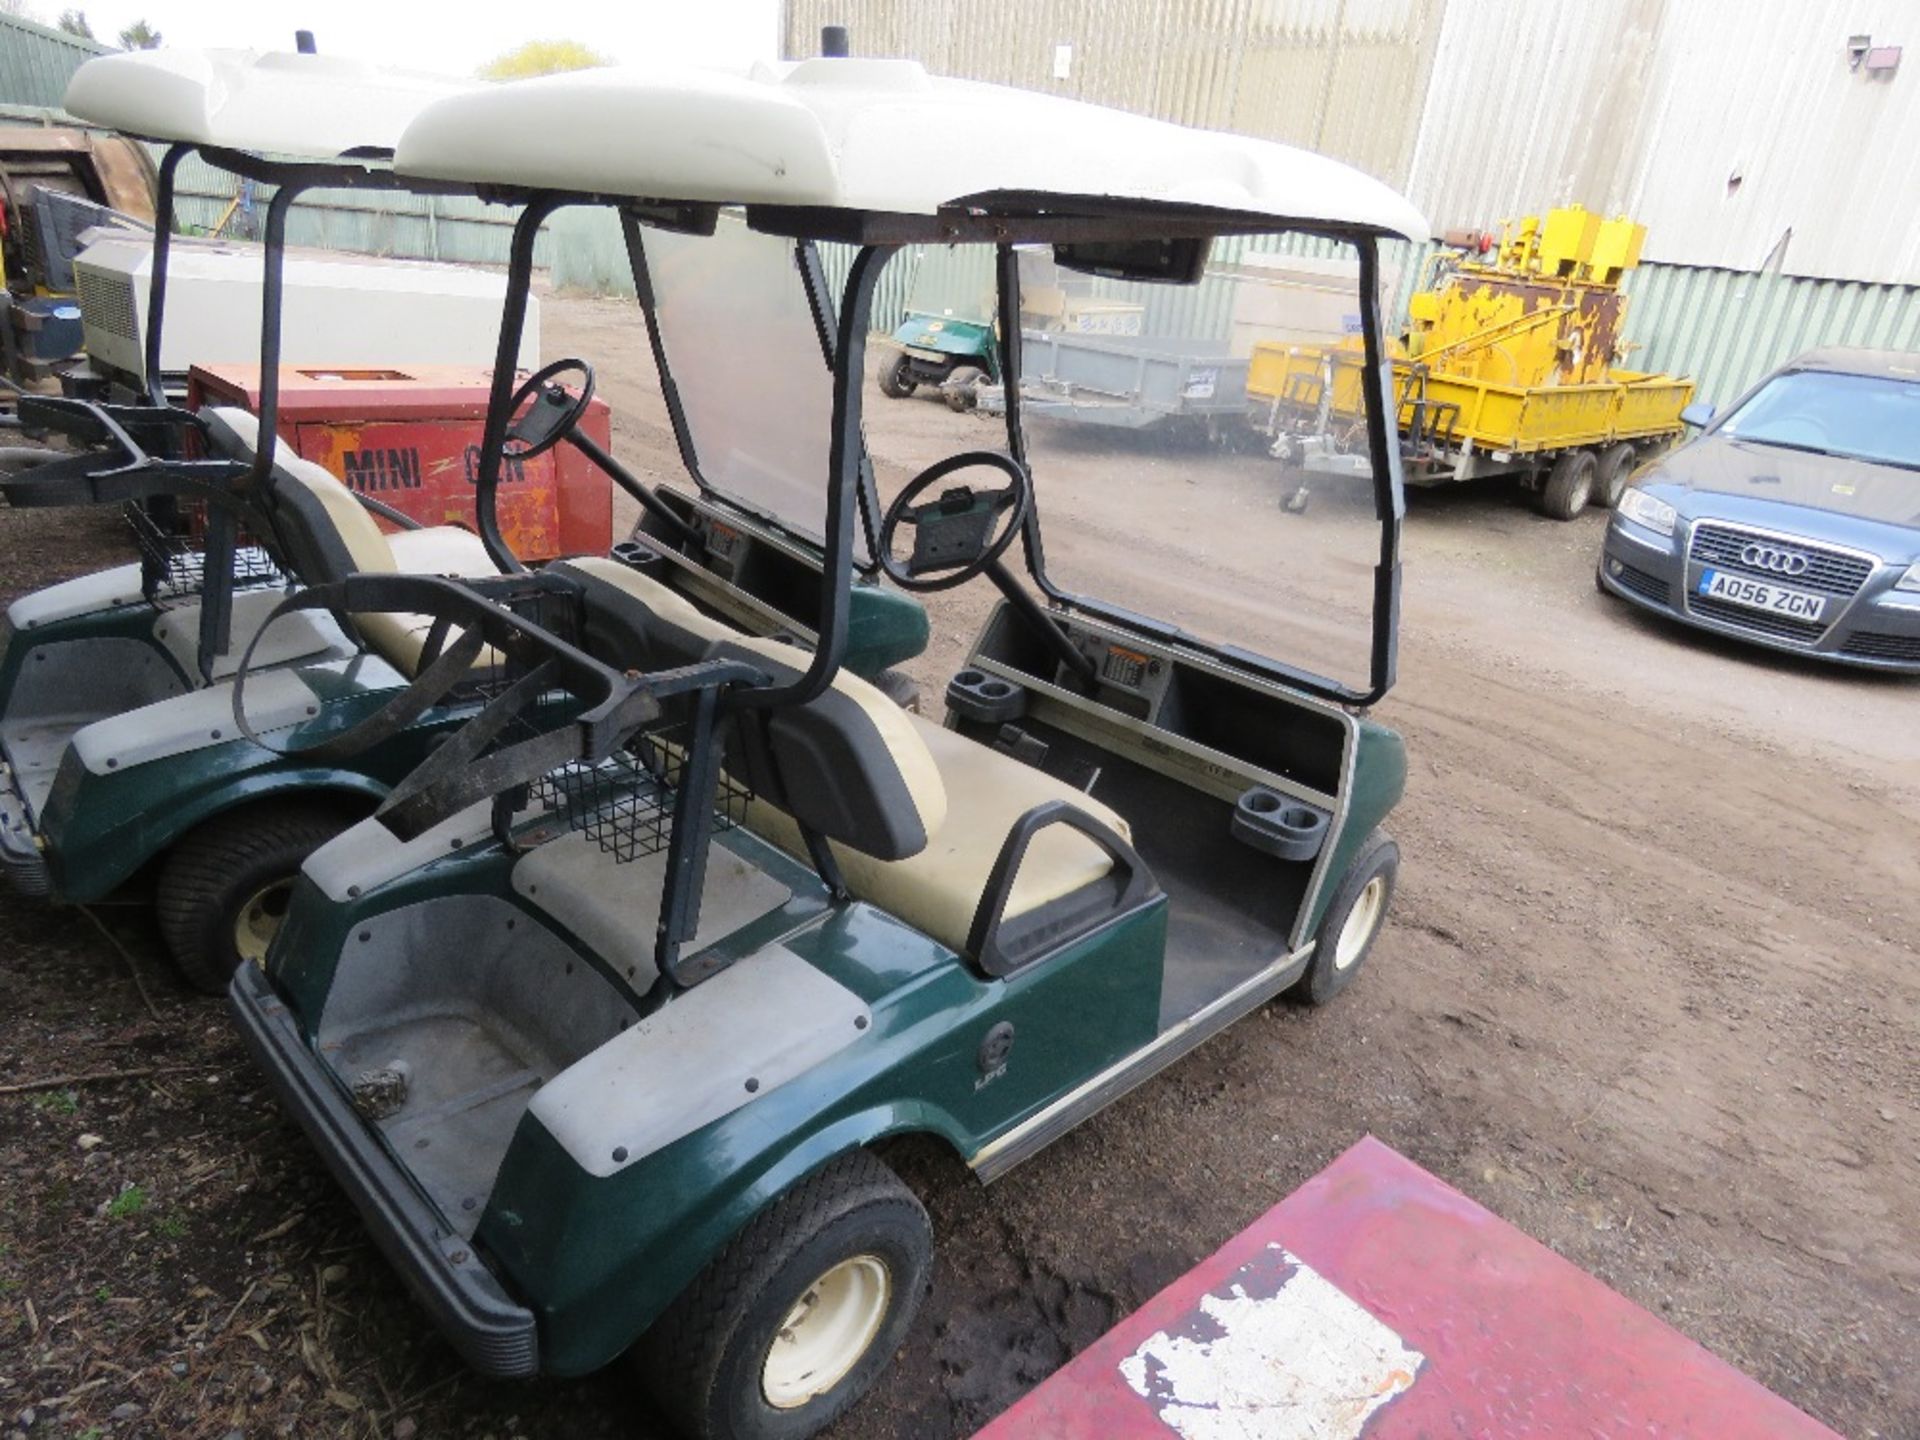 CLUBCAR PETROL ENGINED GOLF CART. BEEN STORED FOR SOME TIME, UNTESTED. - Image 4 of 9